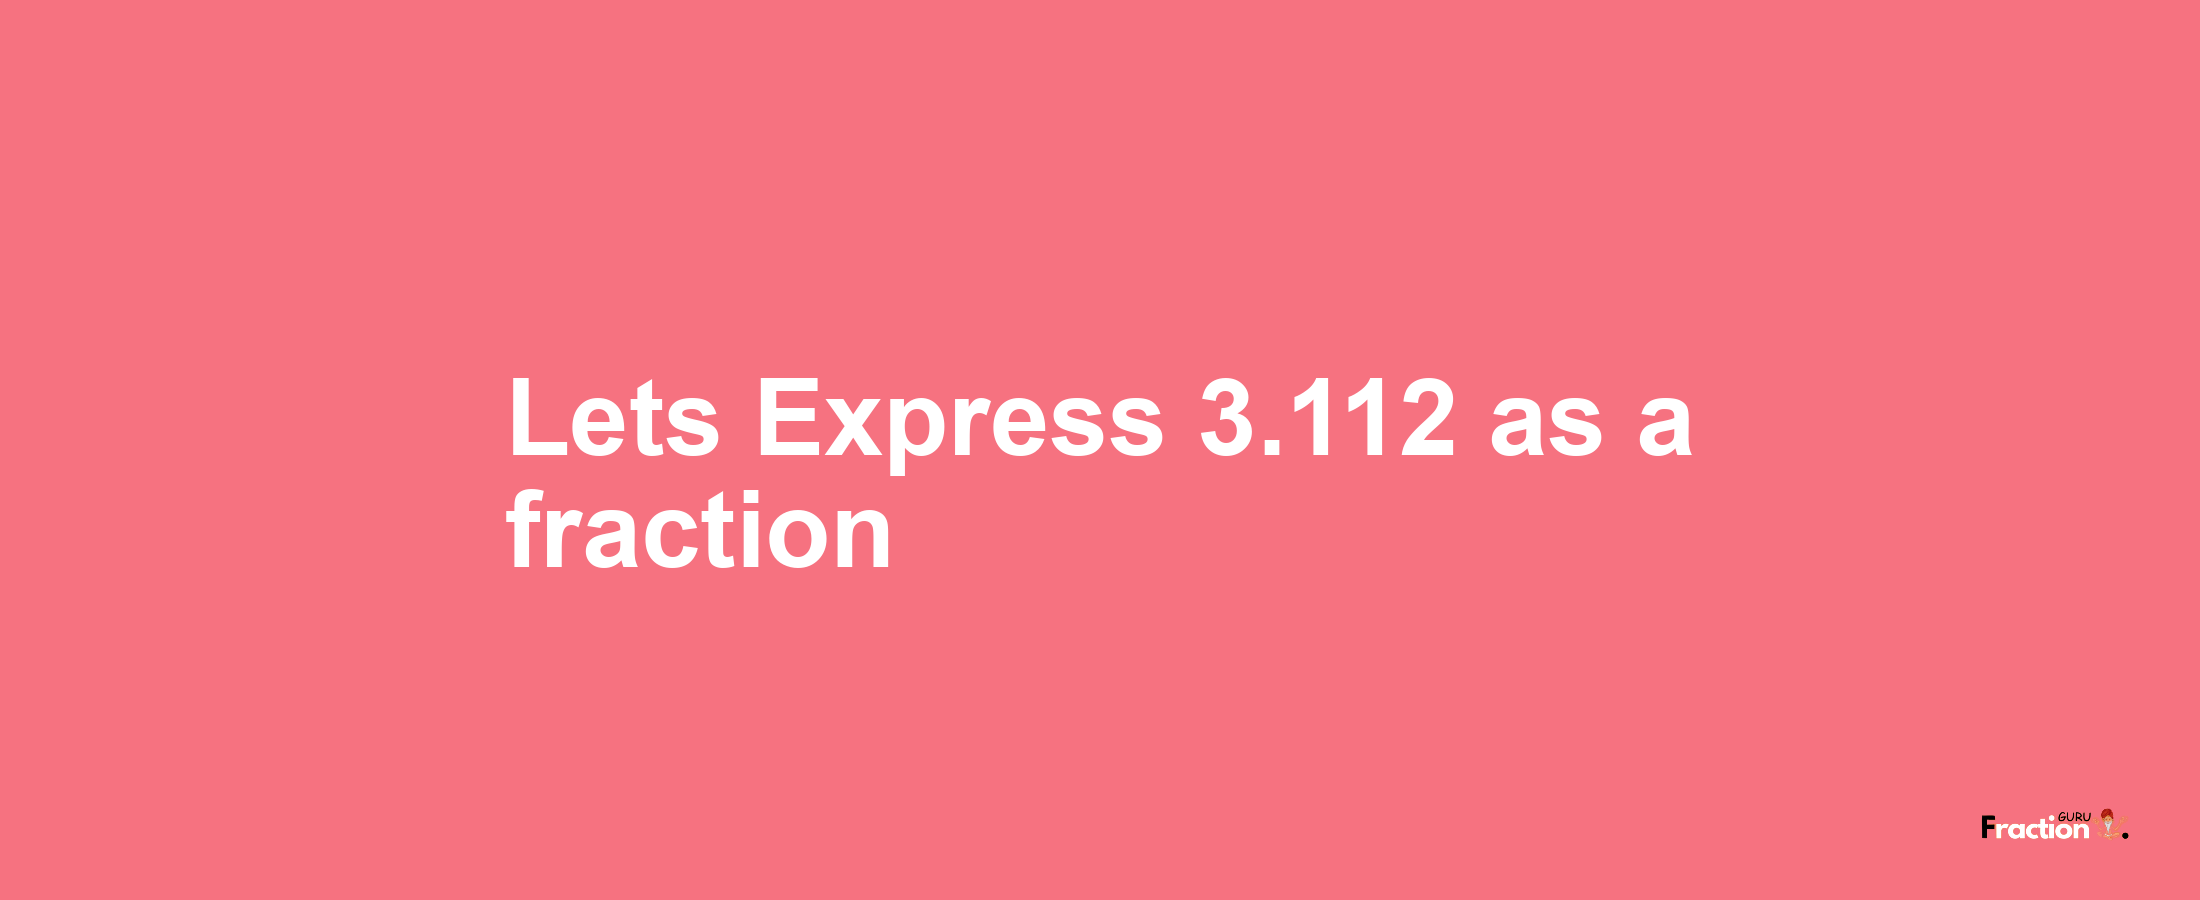 Lets Express 3.112 as afraction